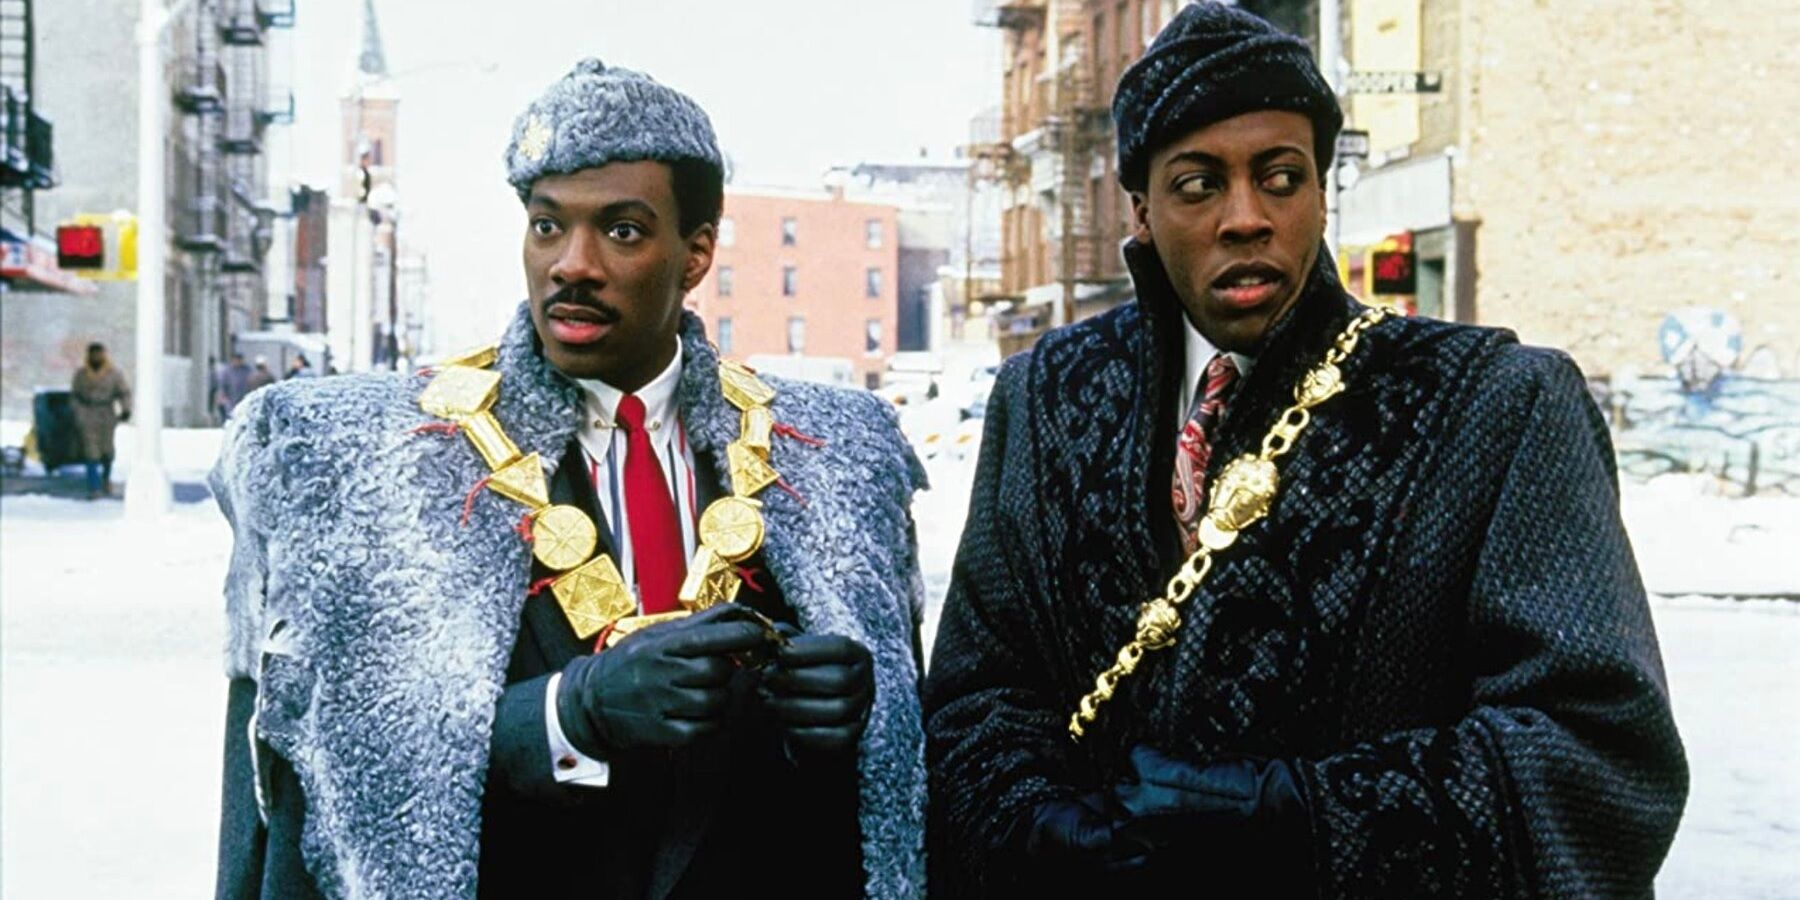 Eddie Murphy and Arsenio Hall in New York in Coming to America